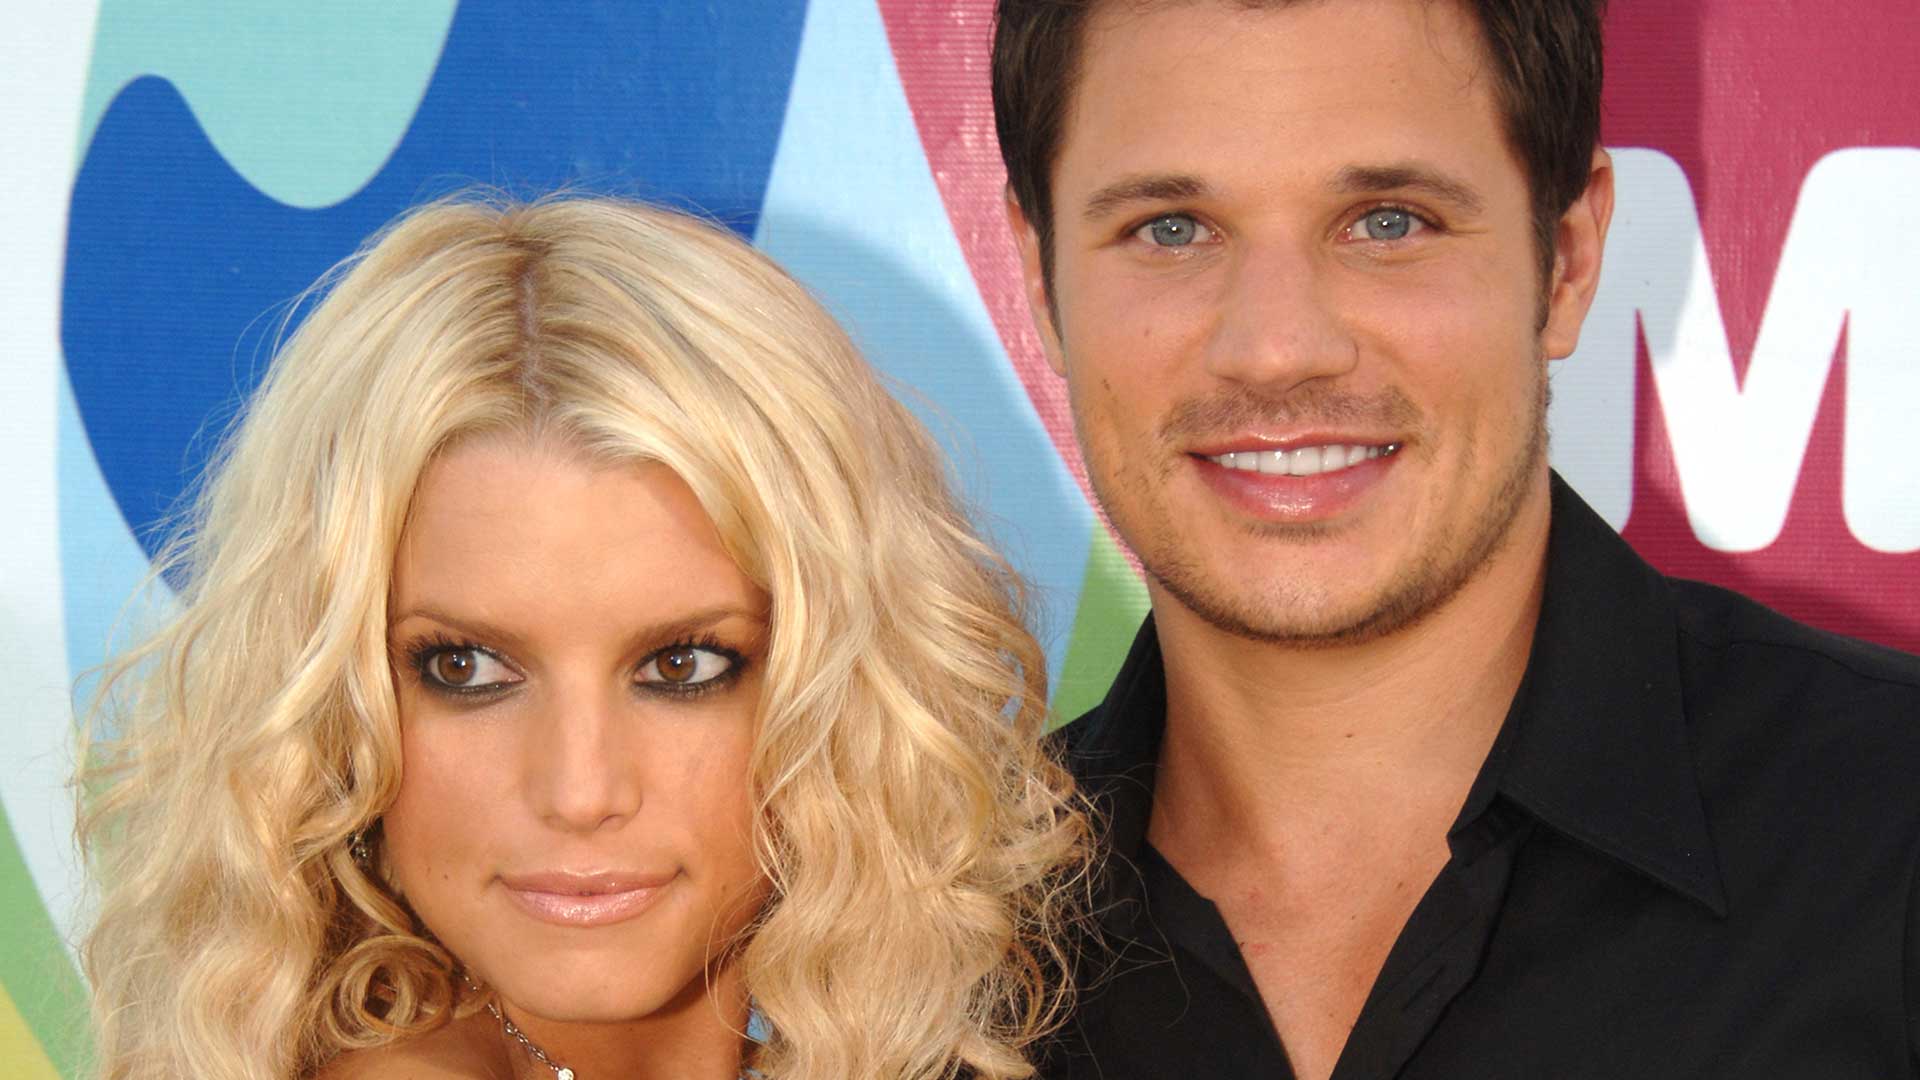 Newlyweds' Producer Dishes on Jessica Simpson & Nick Lachey's Relationship  Trouble: Photo 3926537, Jessica Simpson, Nick Lachey Photos